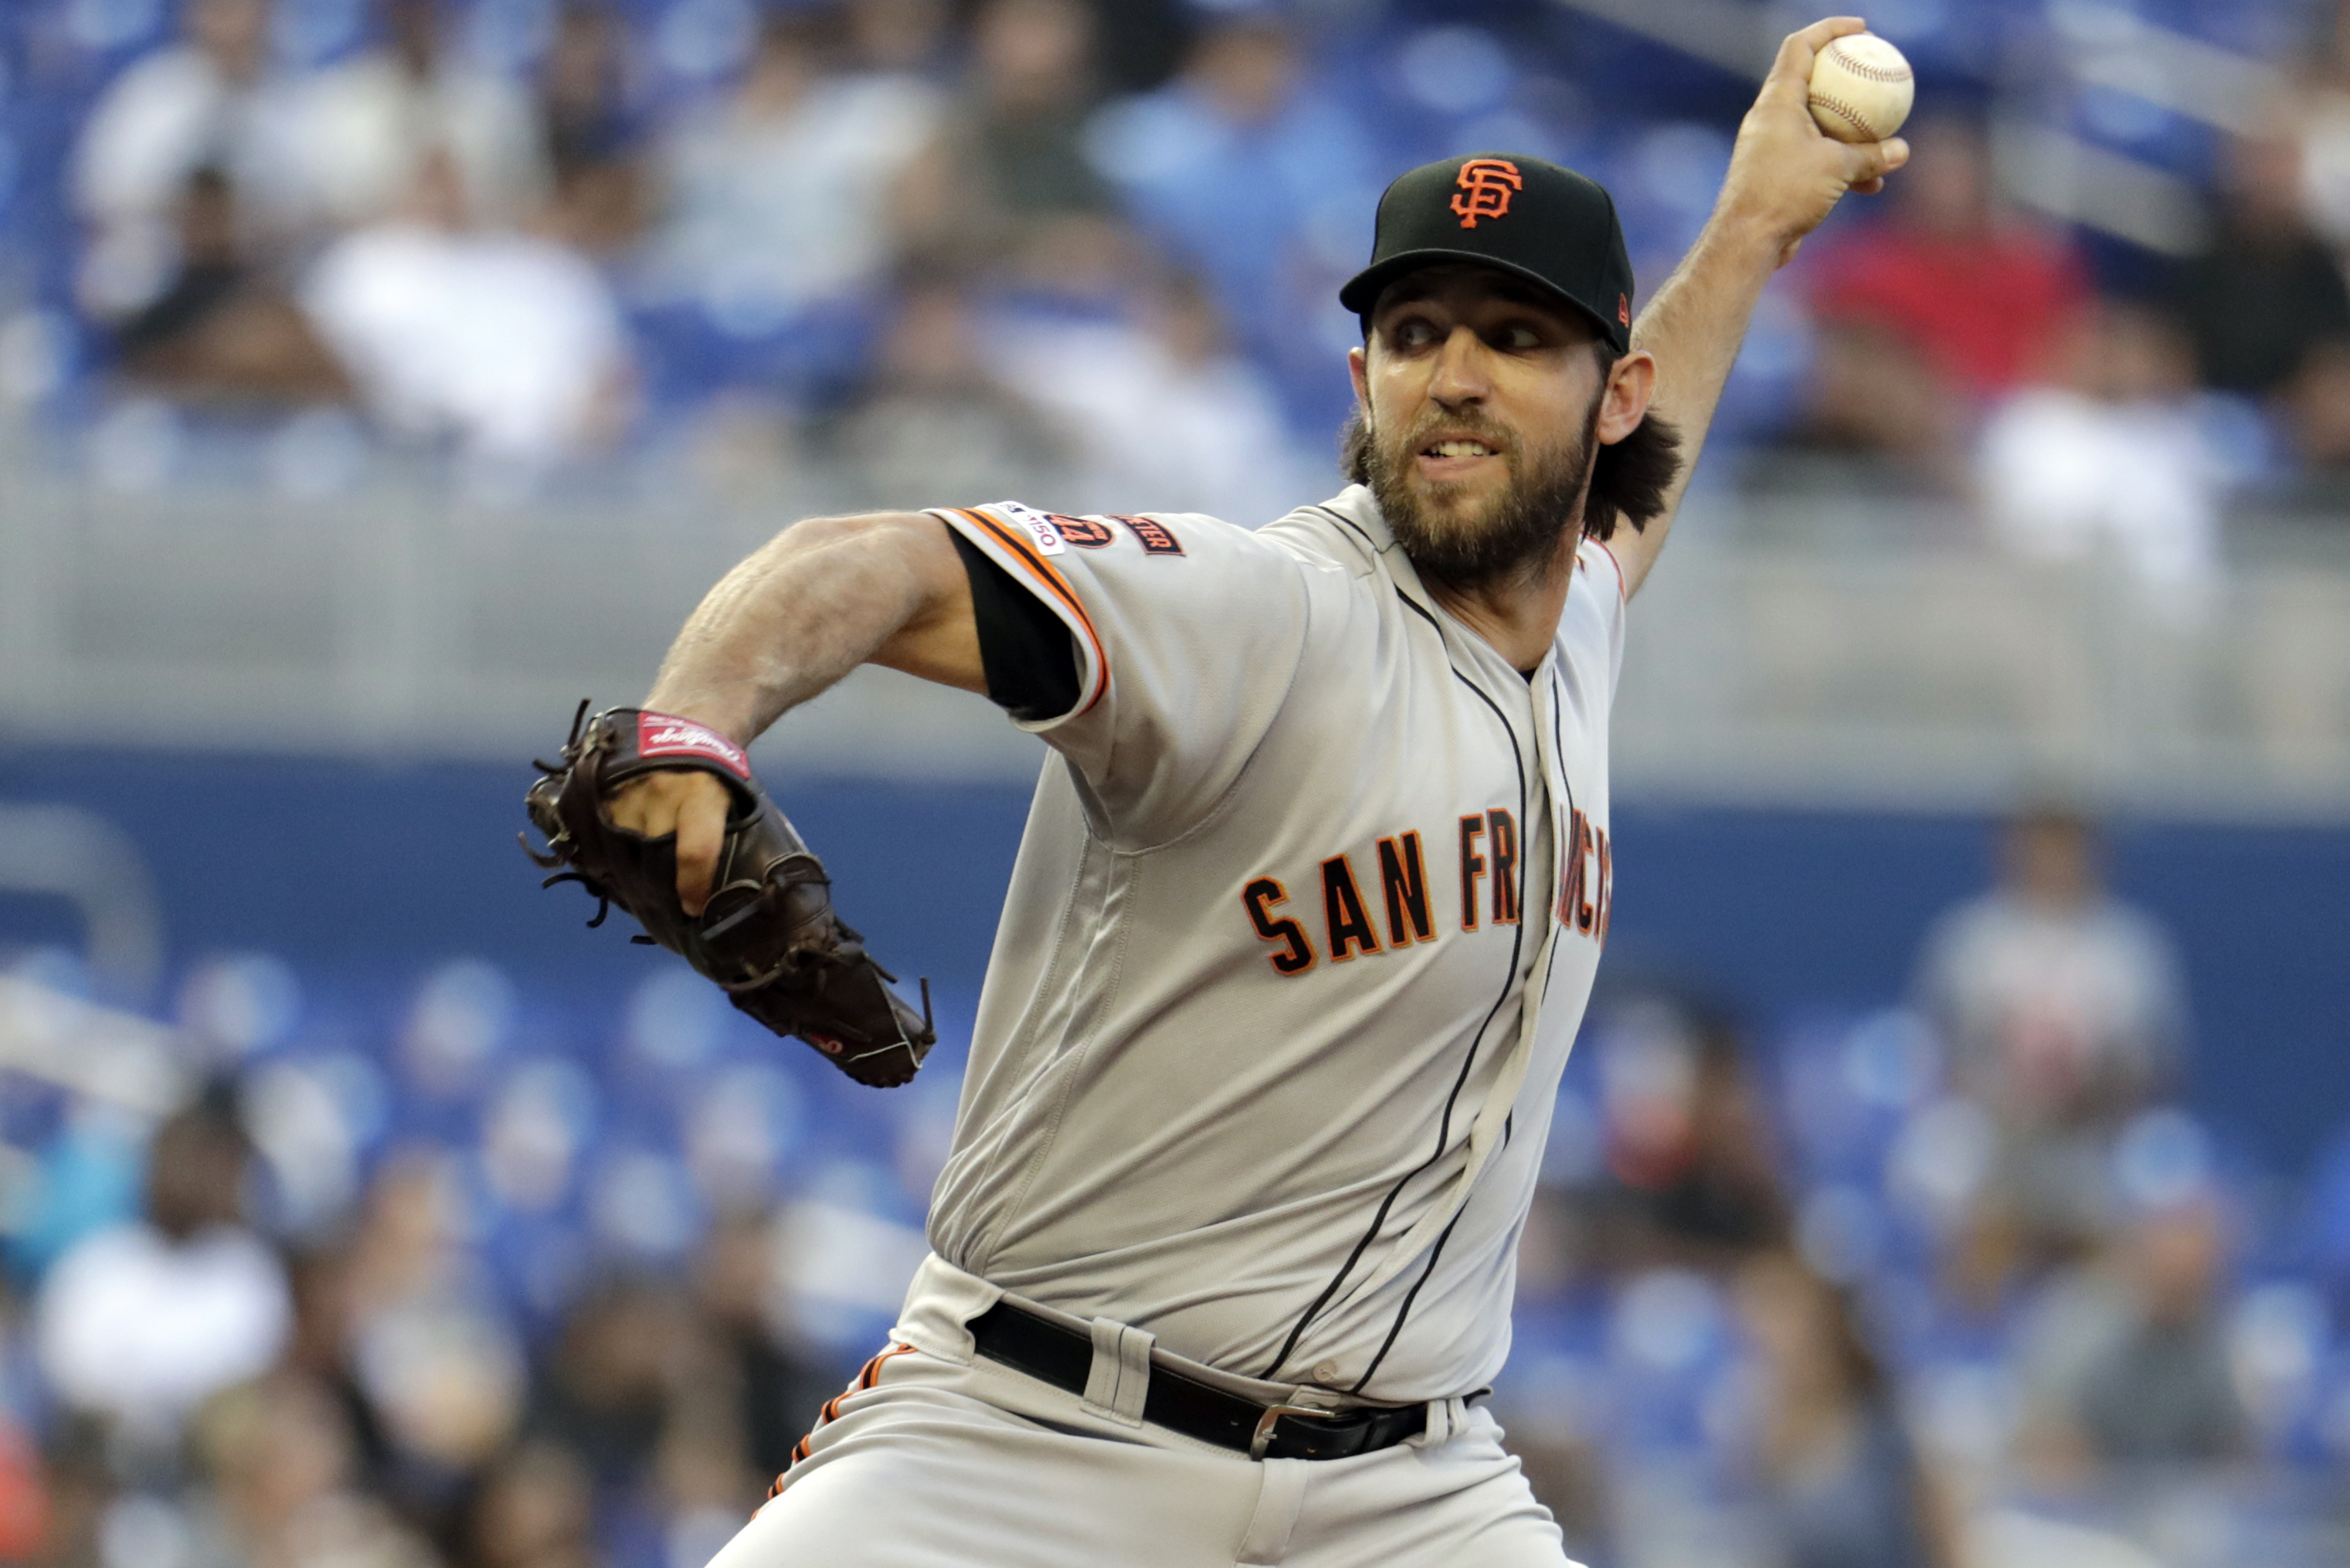 Madison Bumgarner set to pitch again in SF — this time with fans on hand